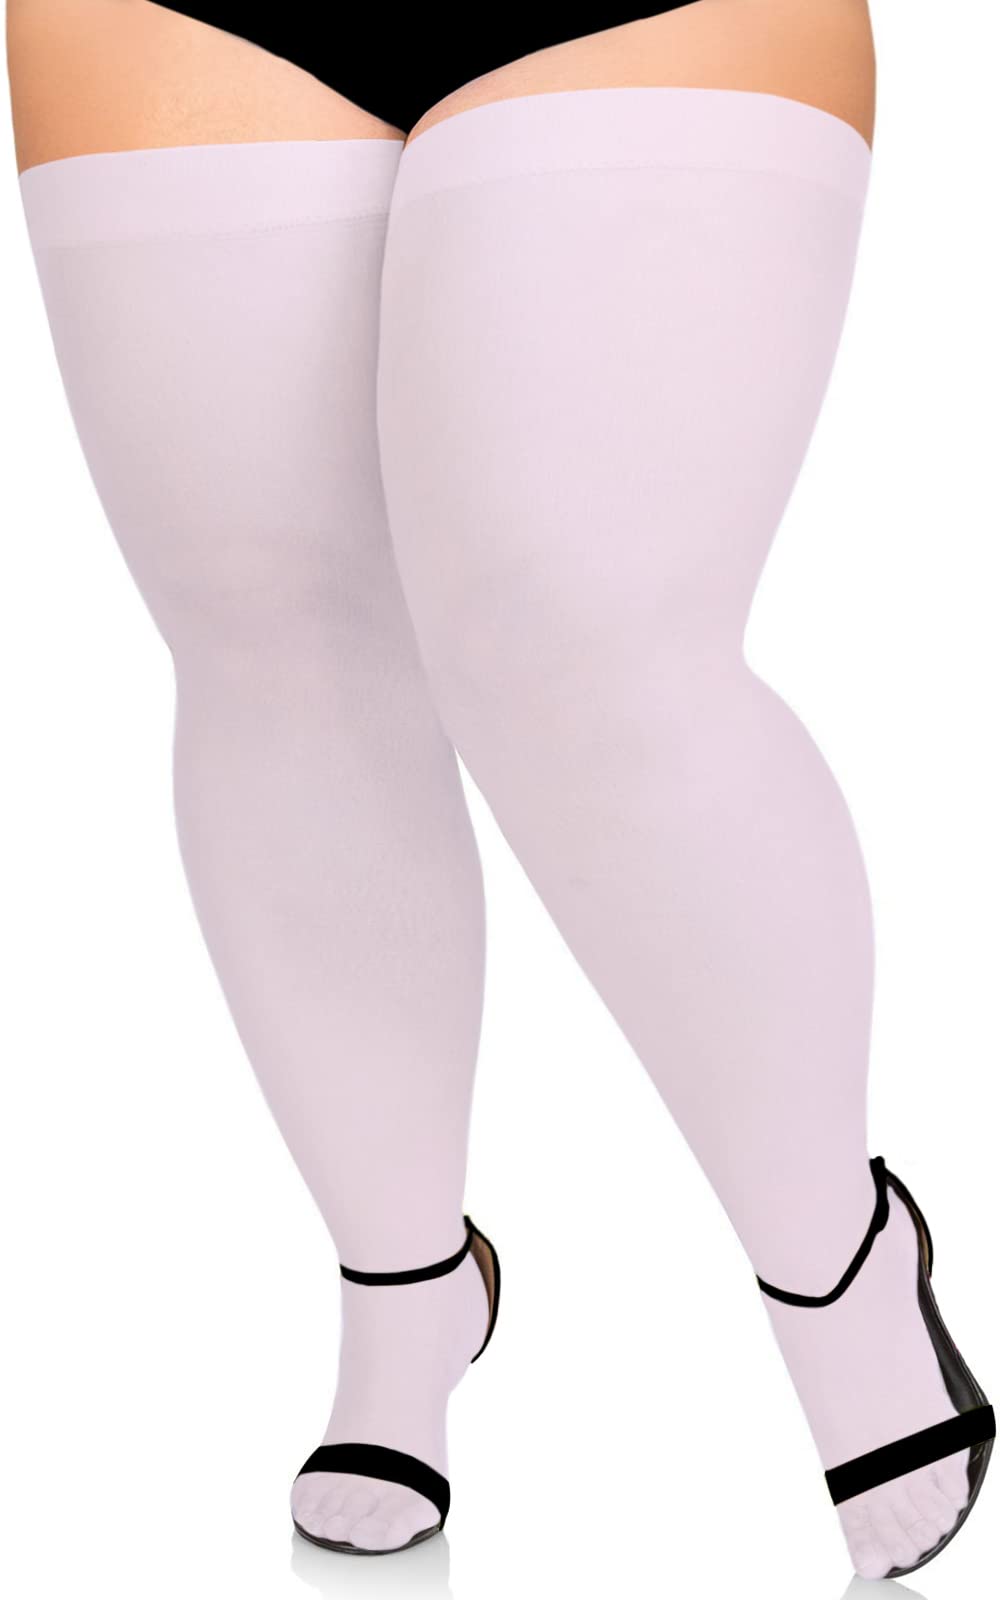 Wool Plus Size Thigh High Socks For Thick Thighs-White